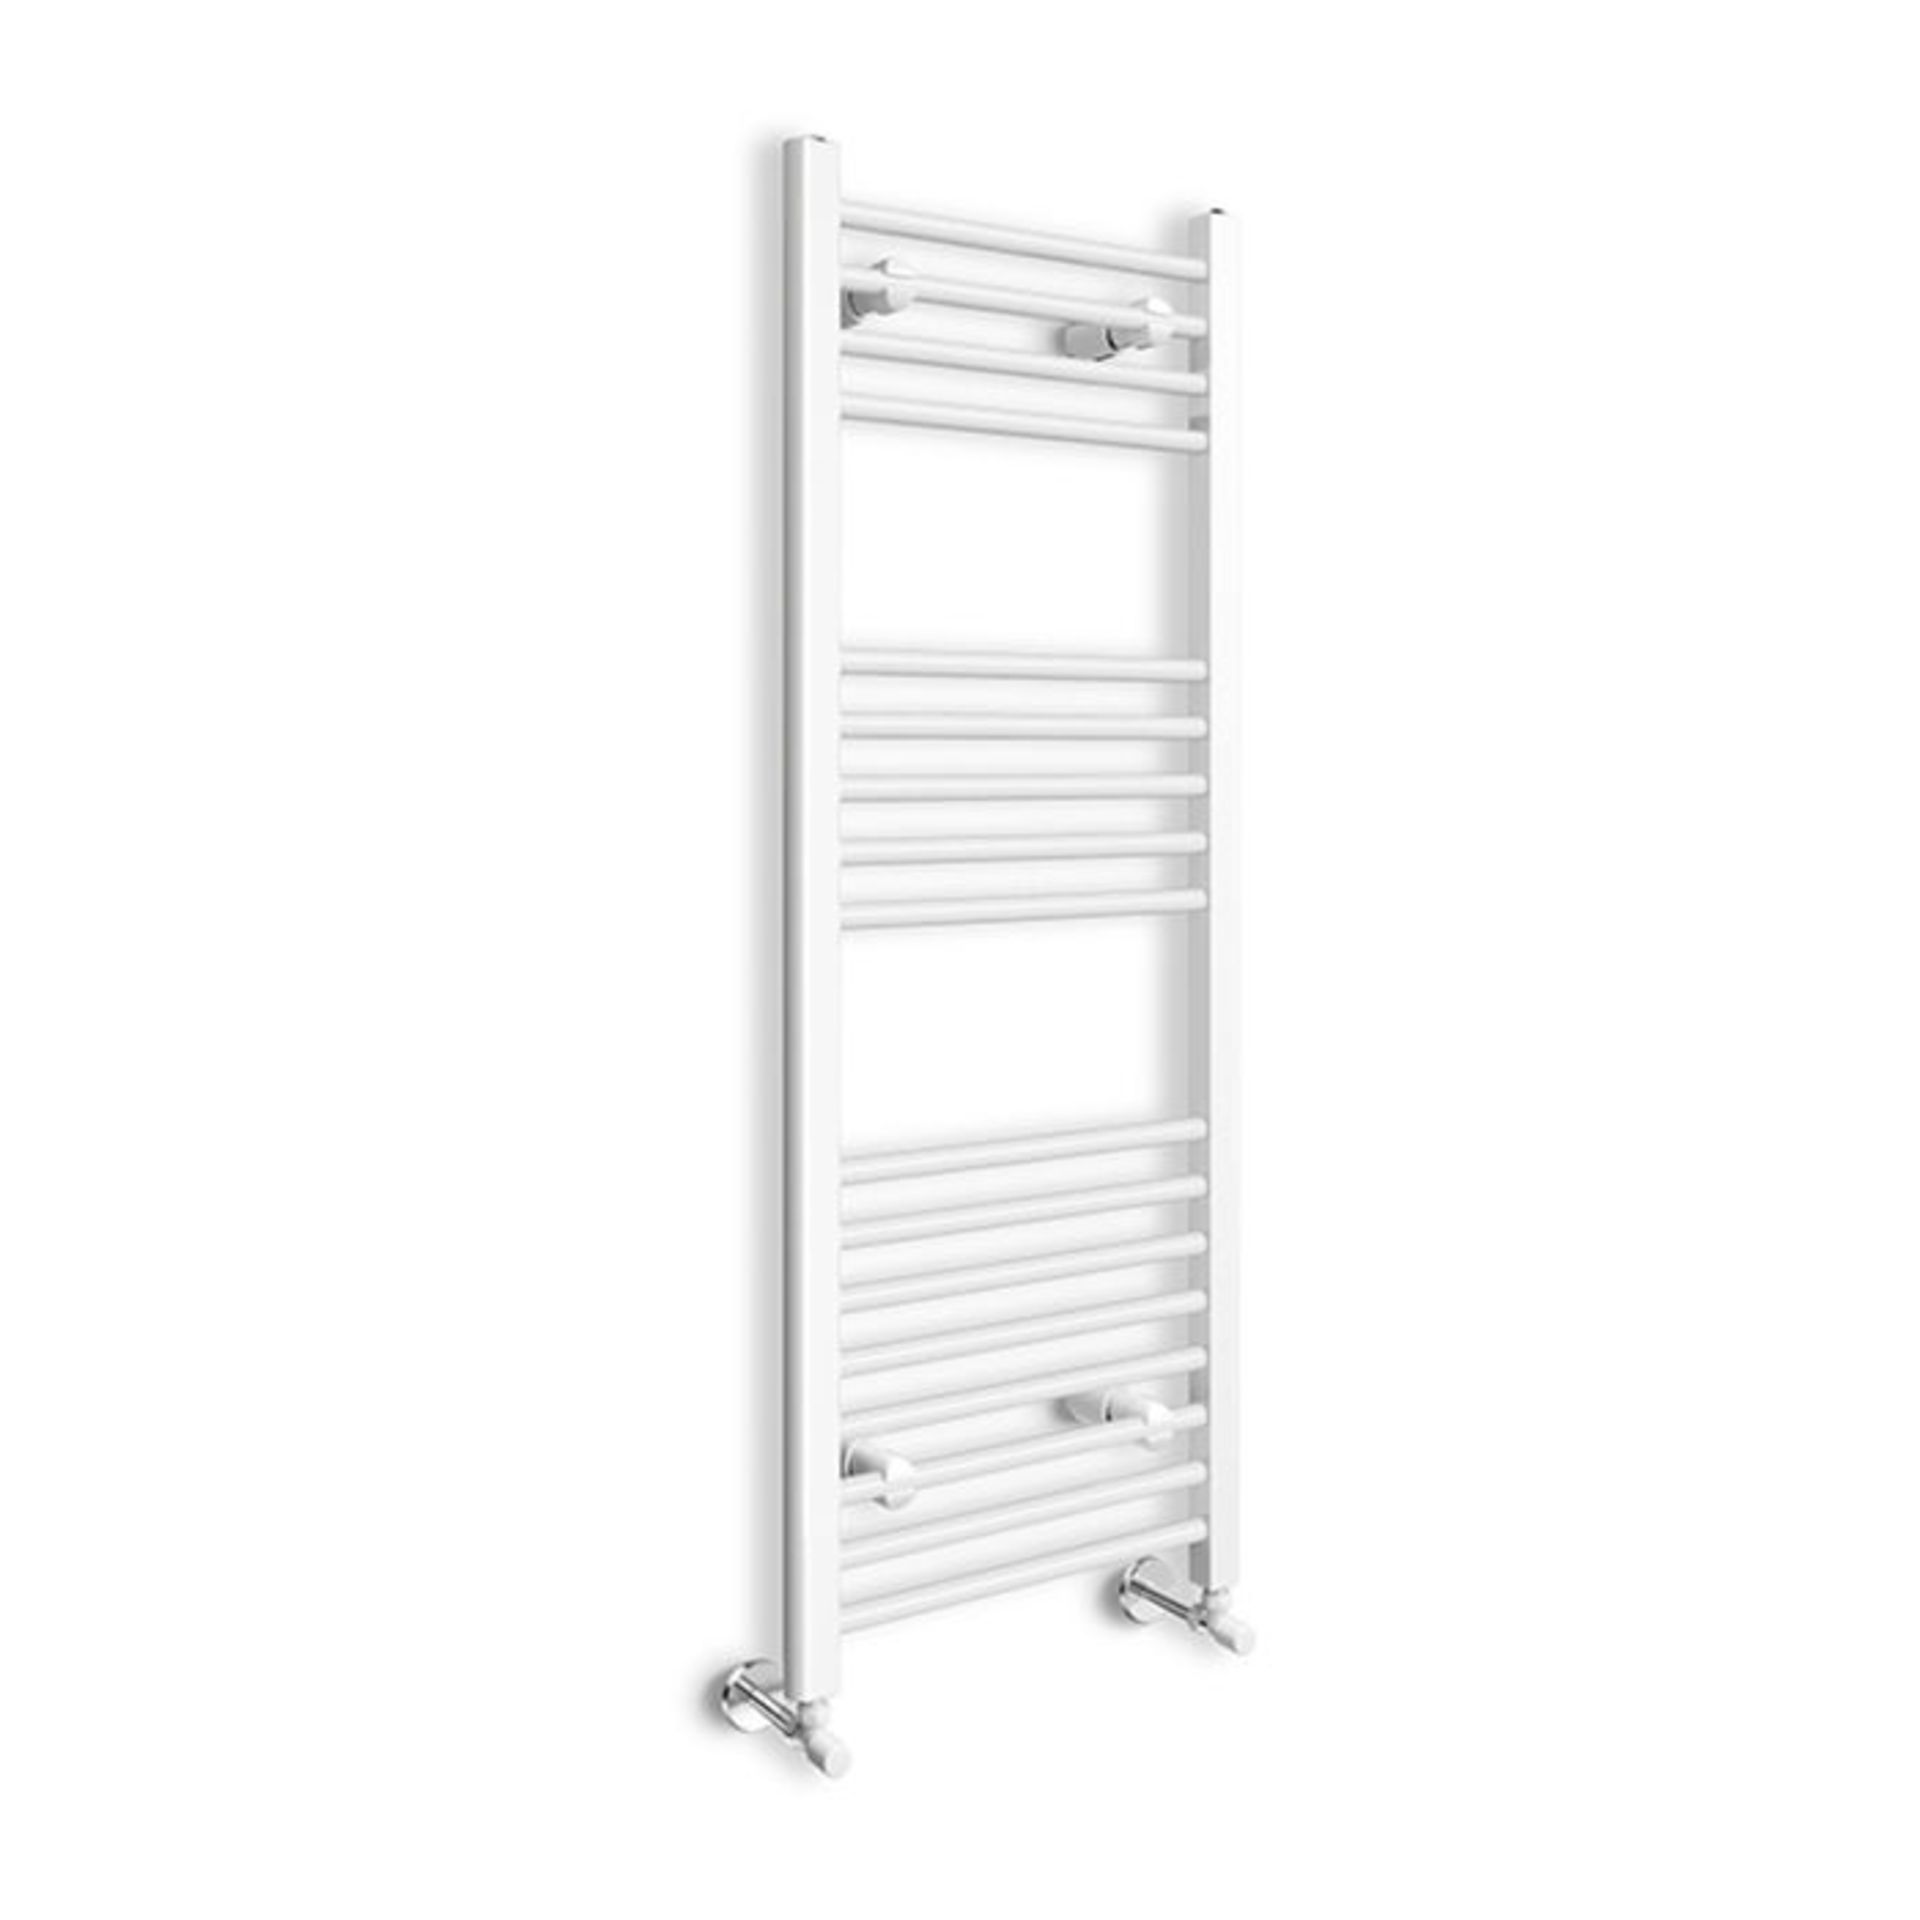 (EW42) 1200x450mm White Heated Towel Radiator. Made from low carbon steel Finished with a high